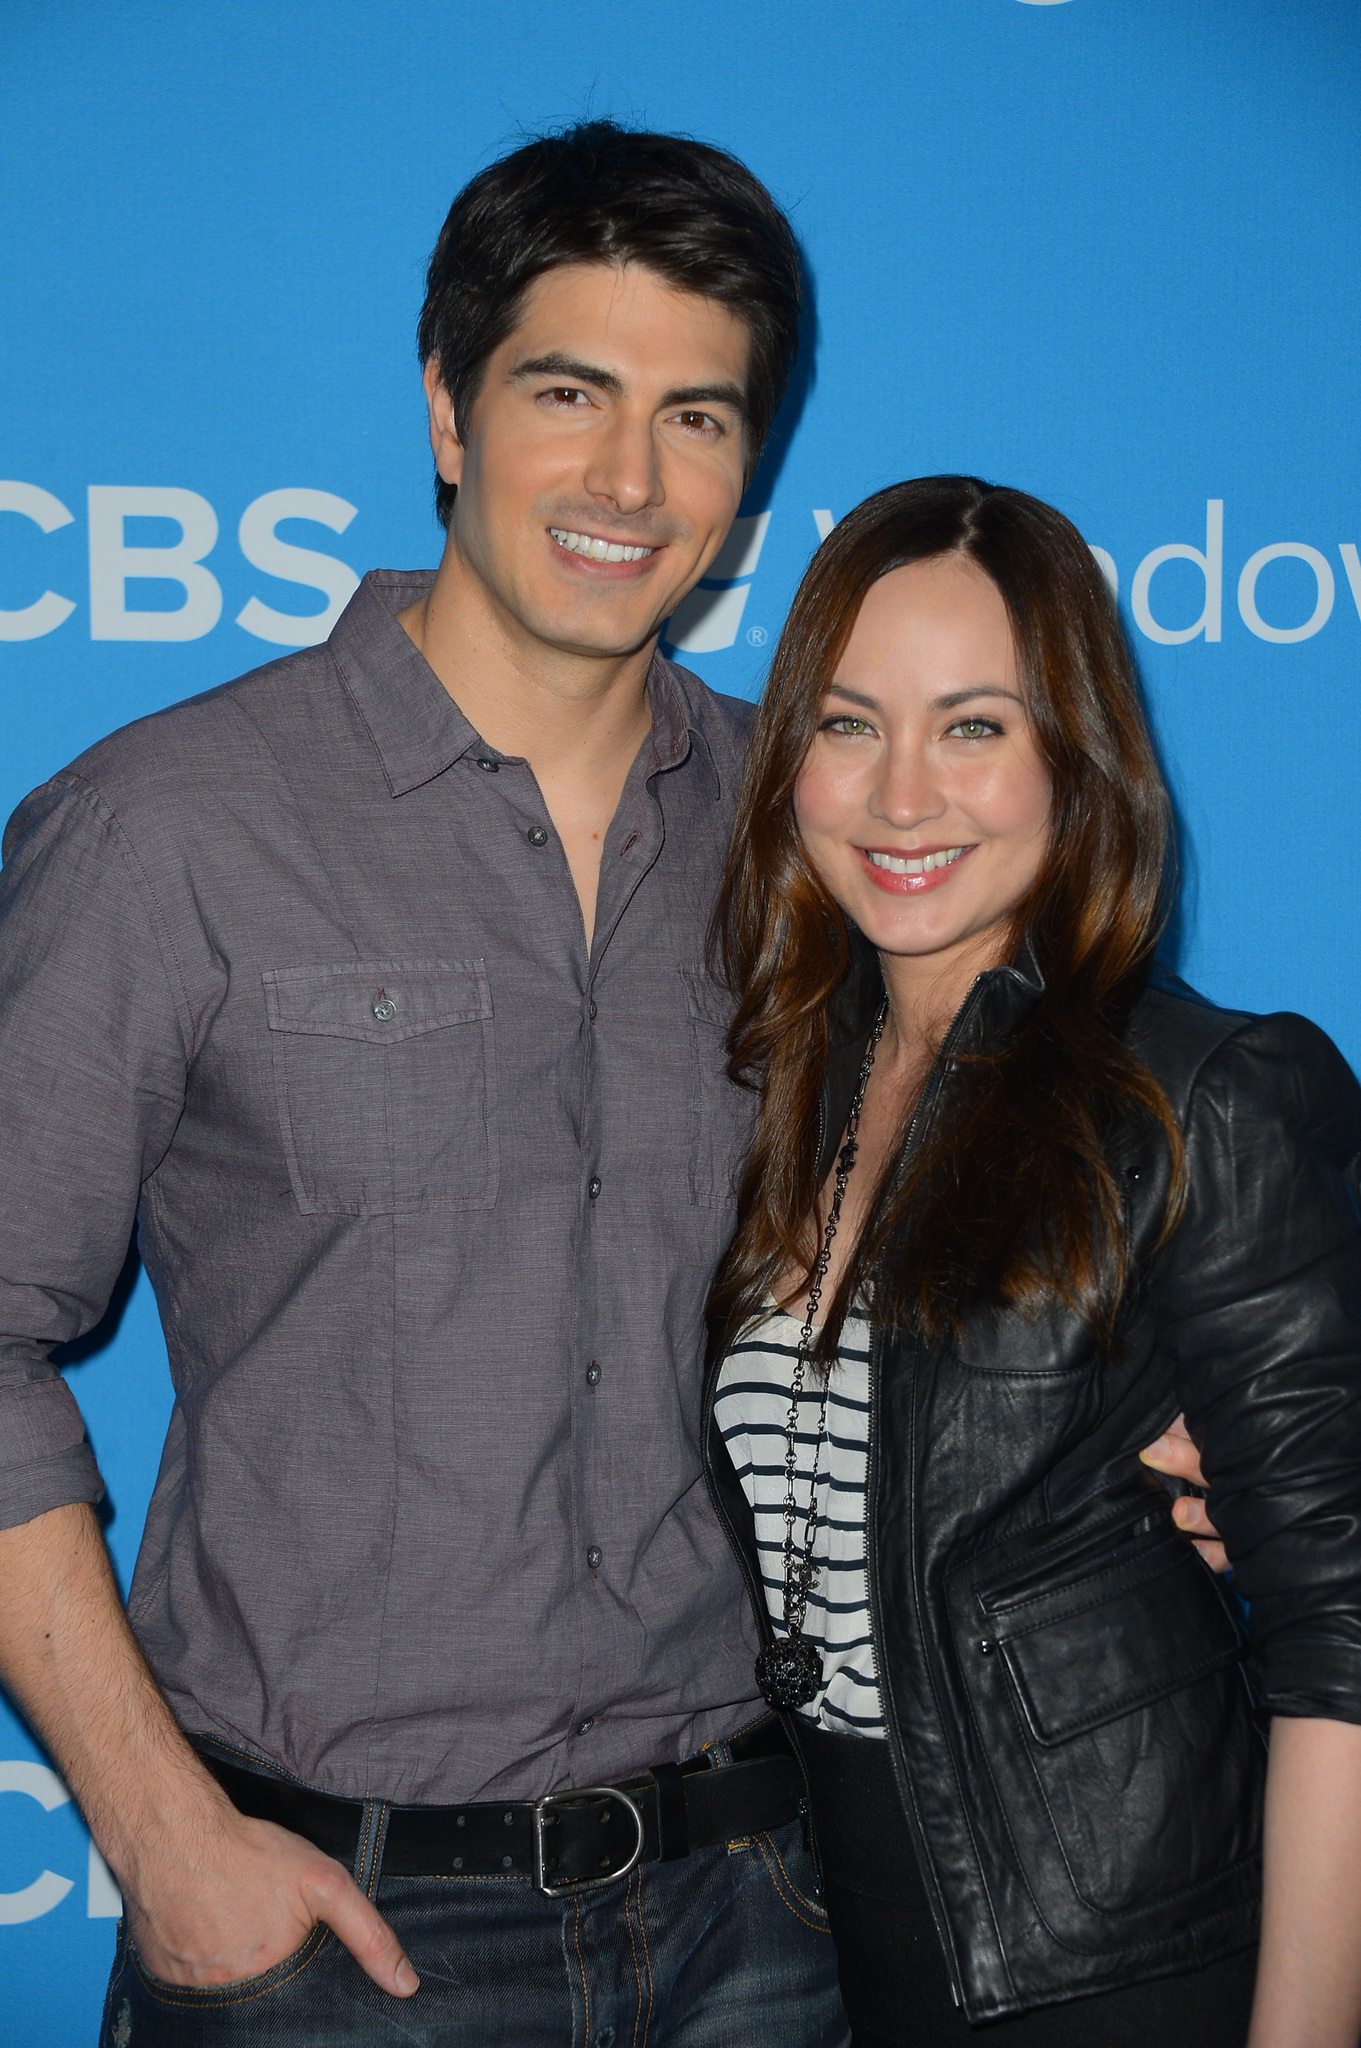 Brandon Routh and Courtney Ford